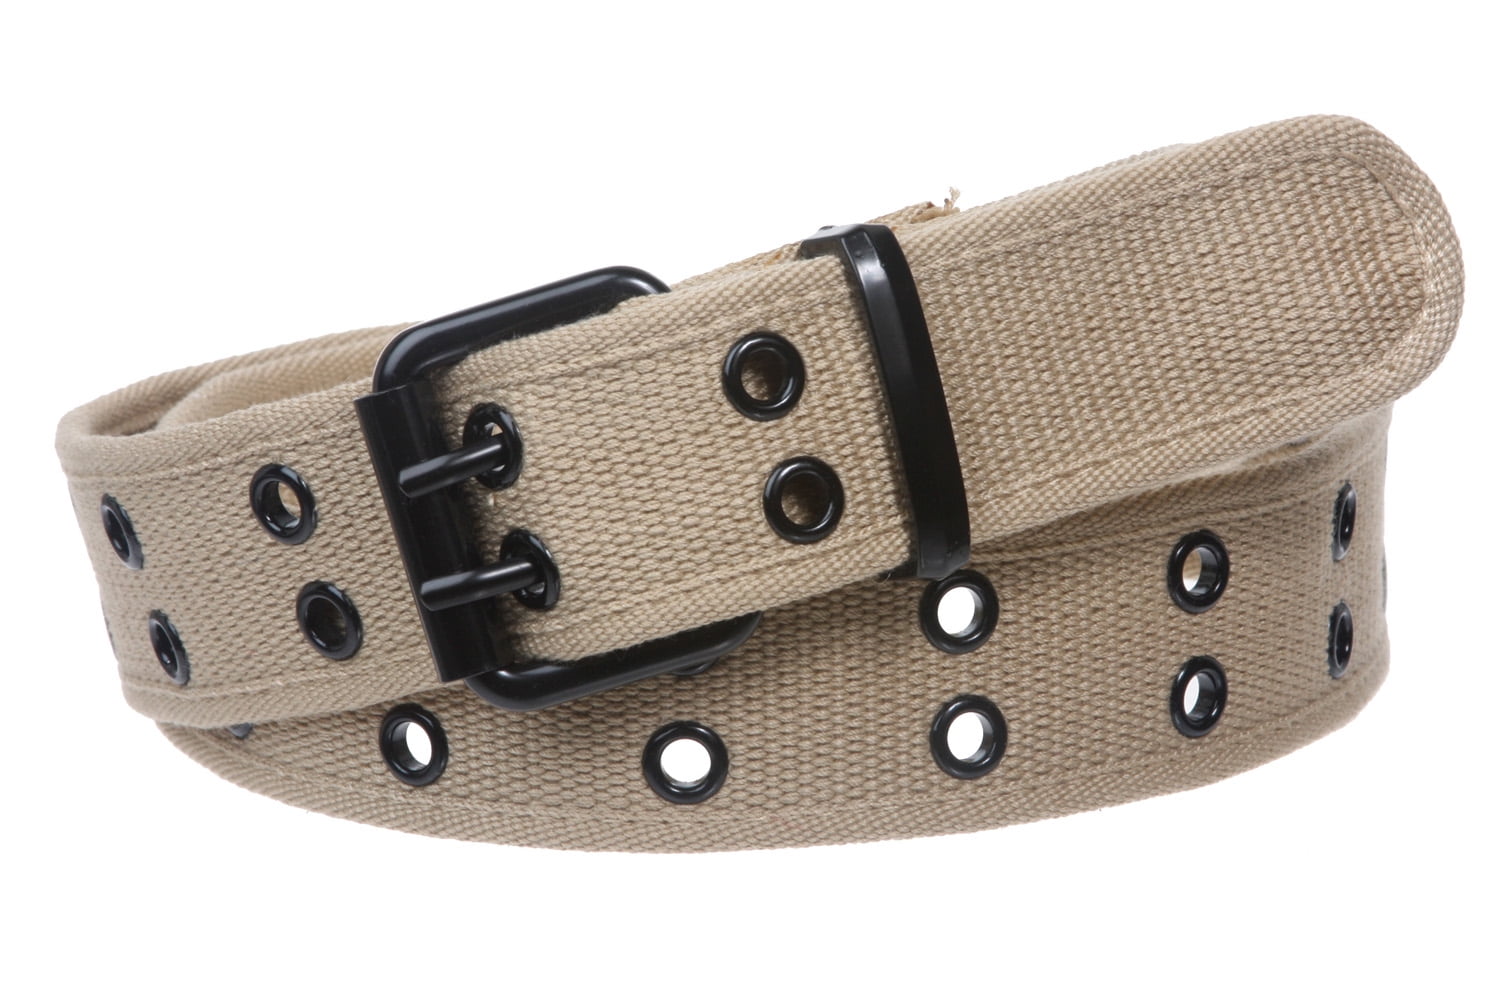 #WN56-1.5" WIDE EGGPLANT CANVAS 2 HOLE BELT WITH EYELETS IN 14 SIZES TO FIT MOST 